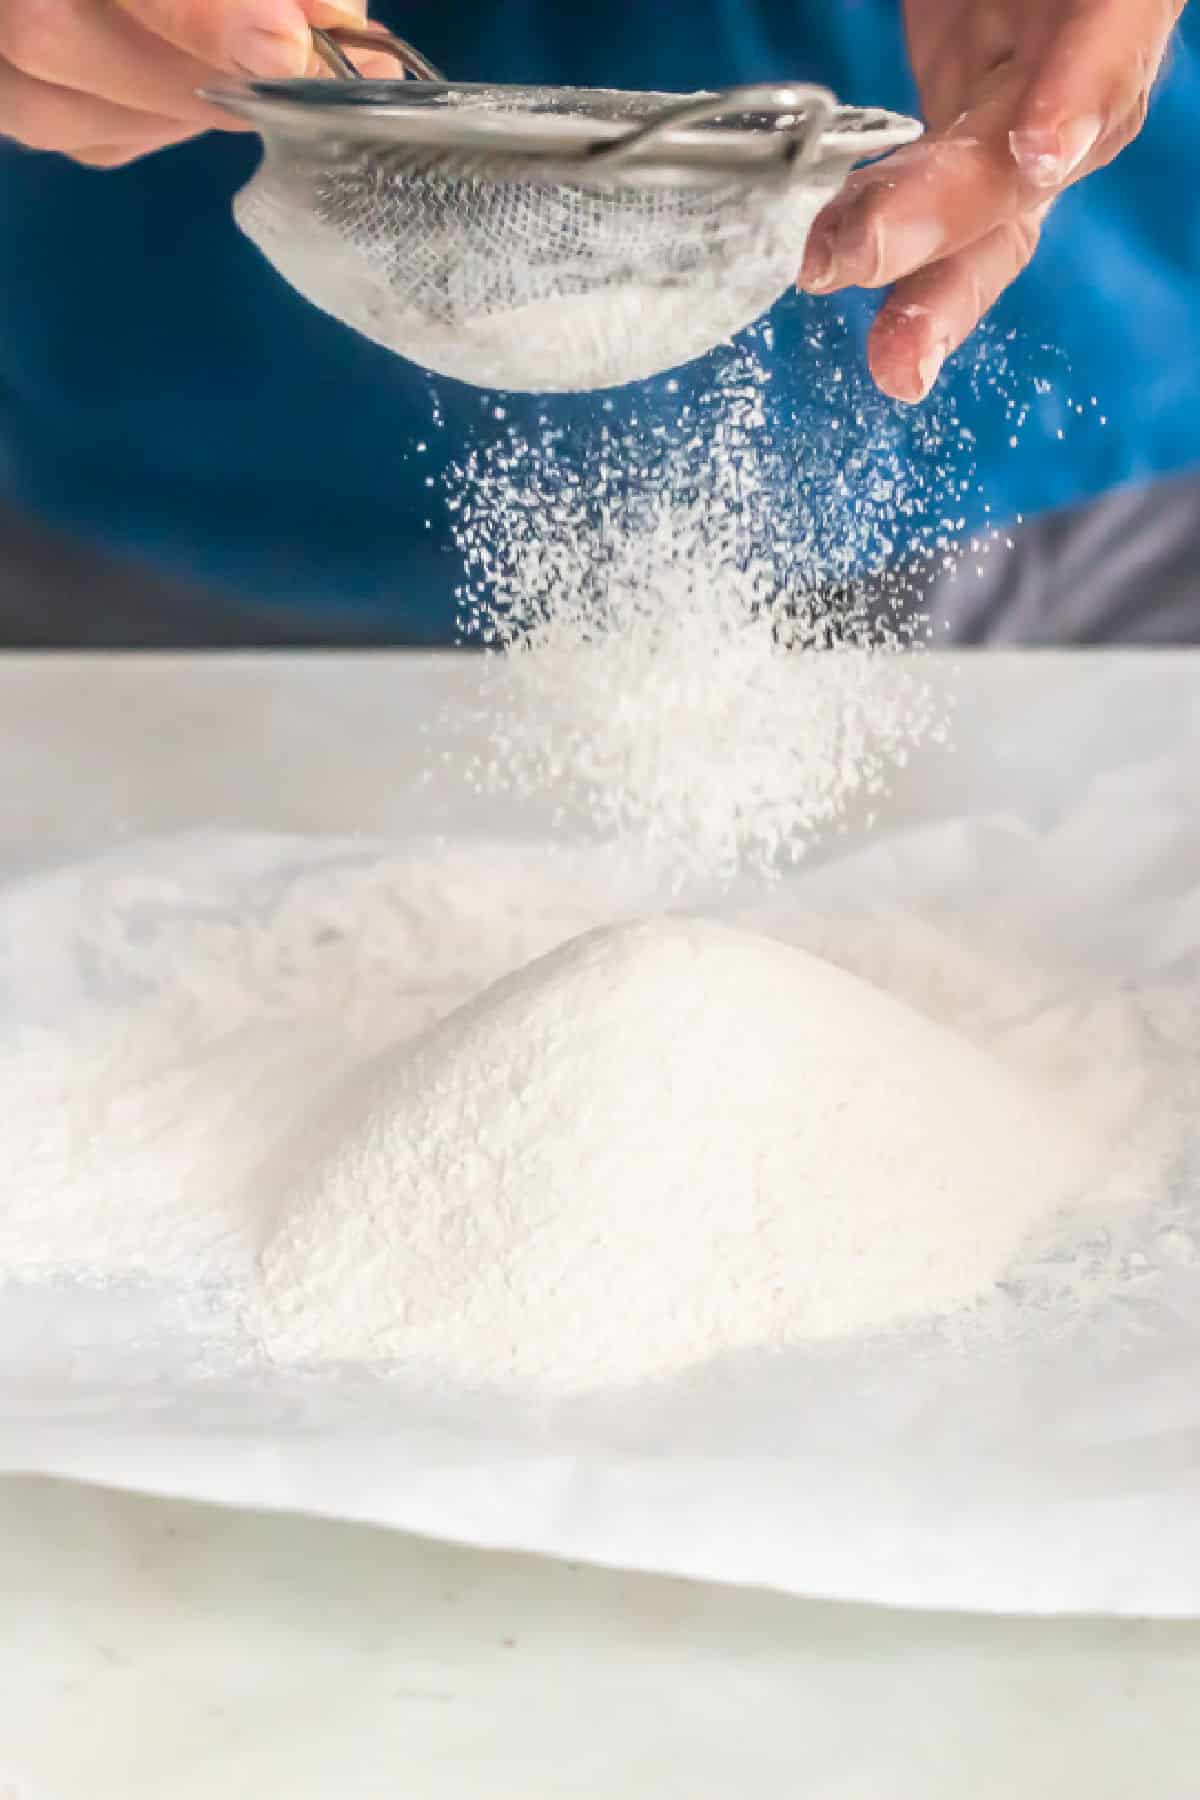 https://www.culinaryhill.com/wp-content/uploads/2023/12/How-to-Sift-Flour-Culinary-Hill-hero.jpg